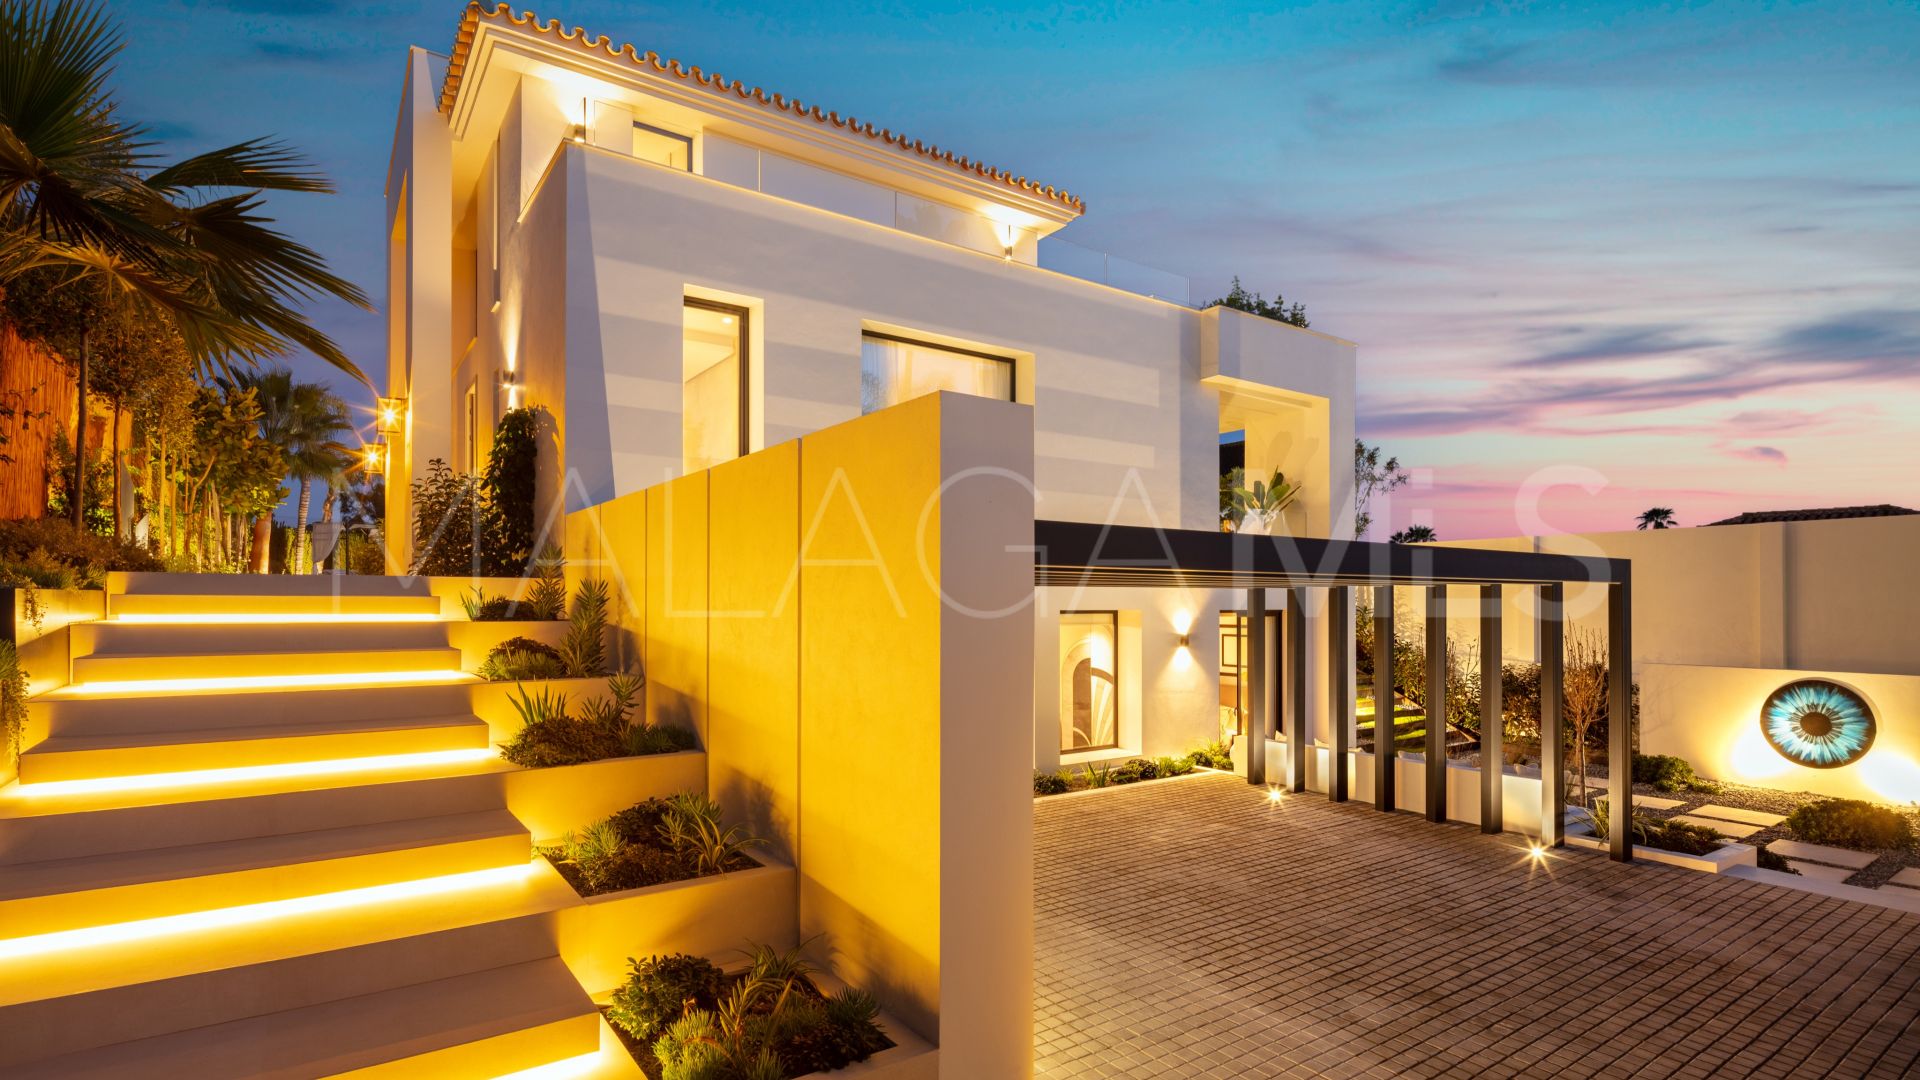 Villa for sale with 4 bedrooms in Supermanzana H